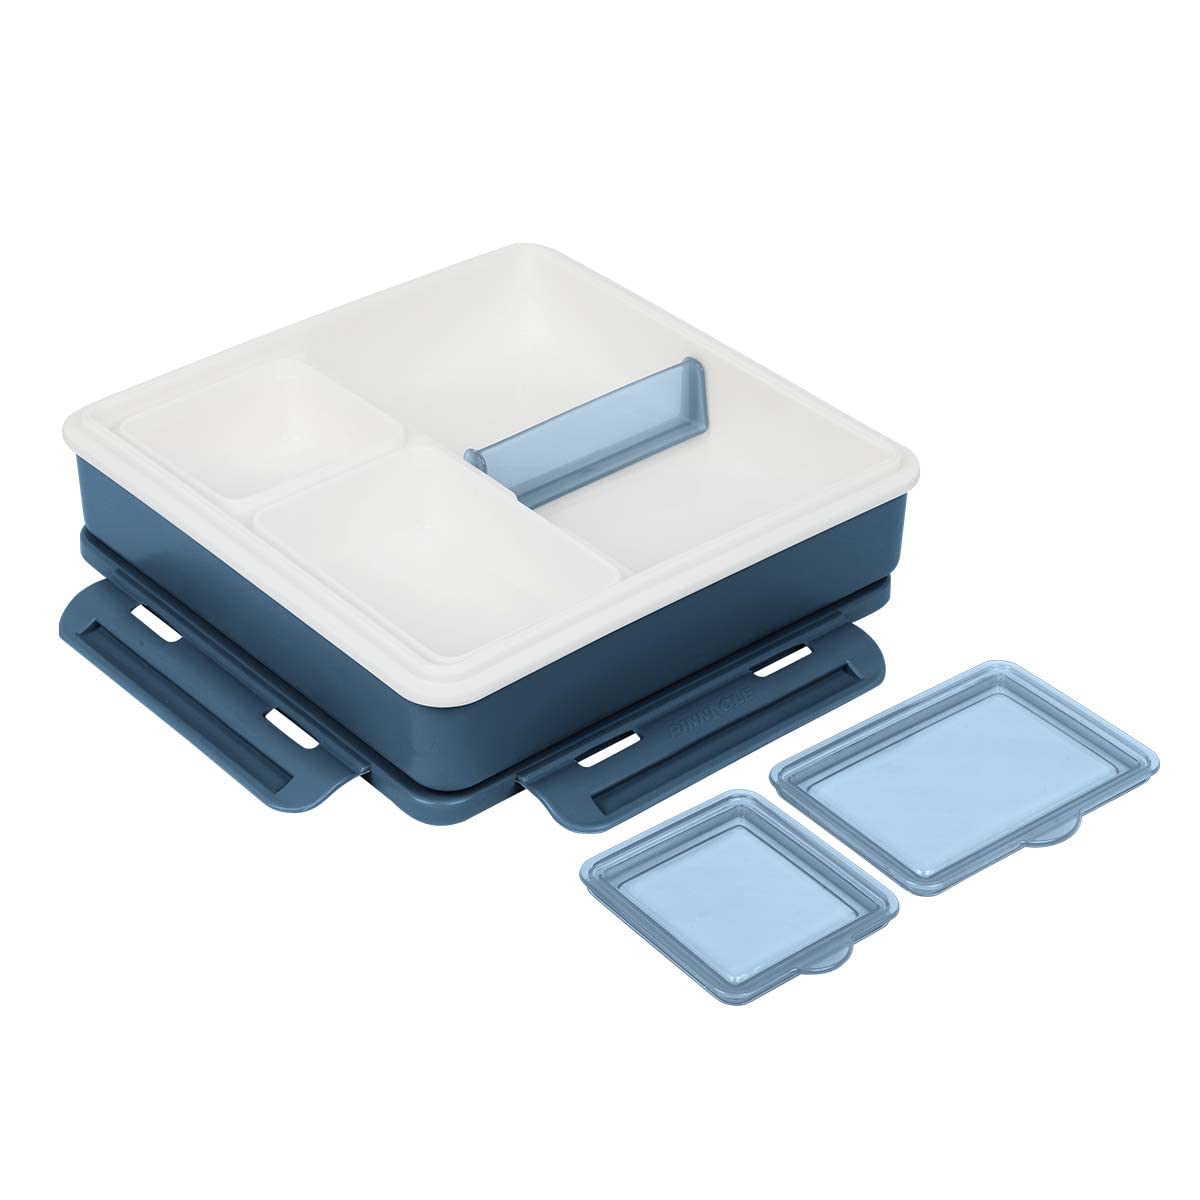 Pinnacle PentaGo Thermoware Insulated Tiffin Box, Adjustable Divider, Microwave Safe, 4 Compartments, Lunch Box, Keeps Food Warm for 4hrs, Leak Proof, Air Tight, 900ml Blue (Stainless Steel)